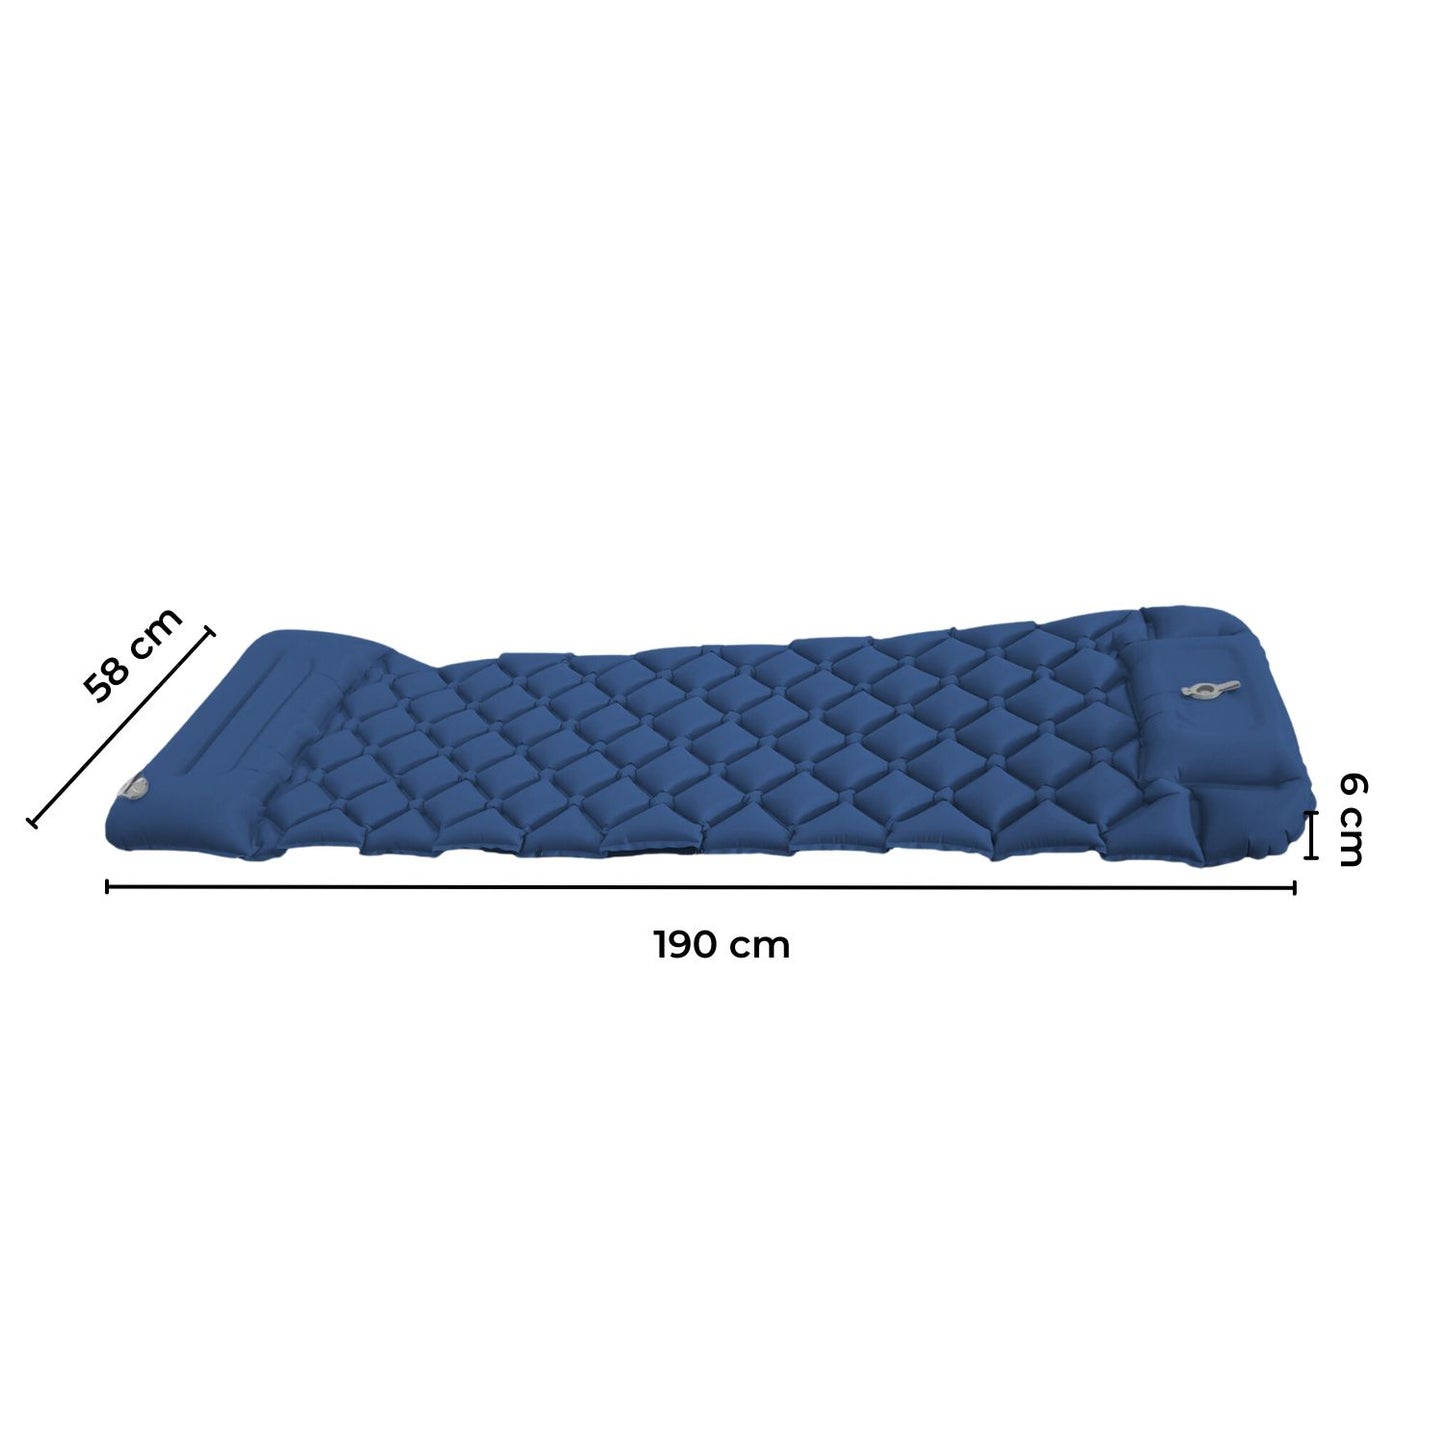 Premium Inflatable Camping Sleeping Pad with Integrated Pillow in Navy Blue